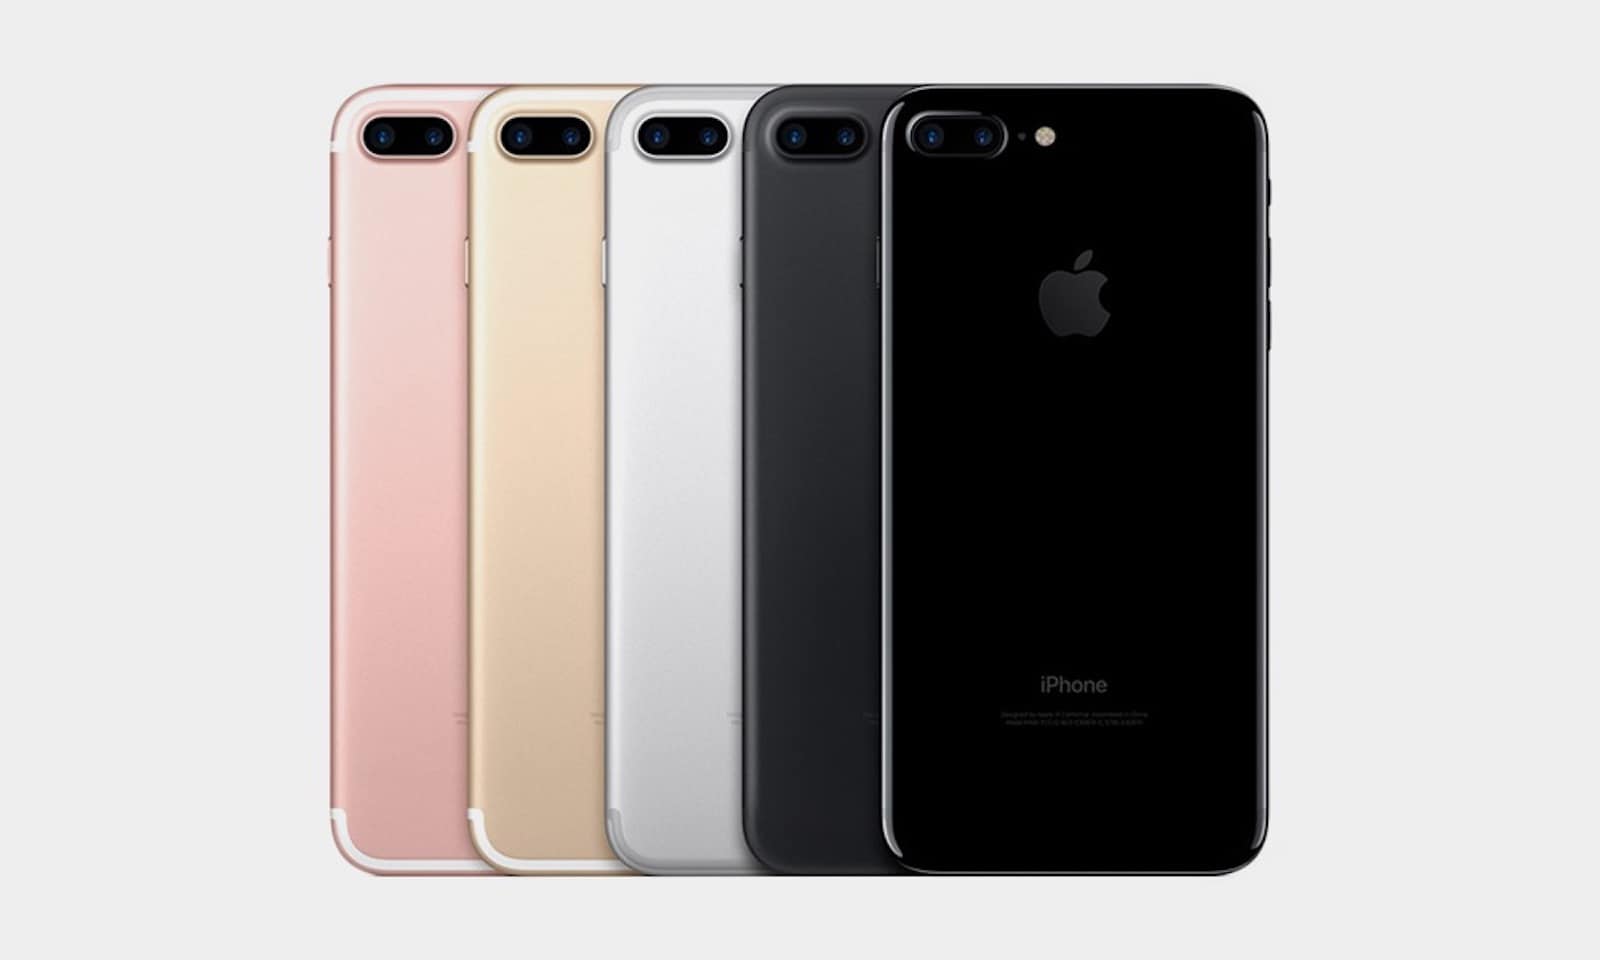 Virgin Mobile Selling Used iPhone 7, 7 Plus Starting at $380 - The Mac Observer